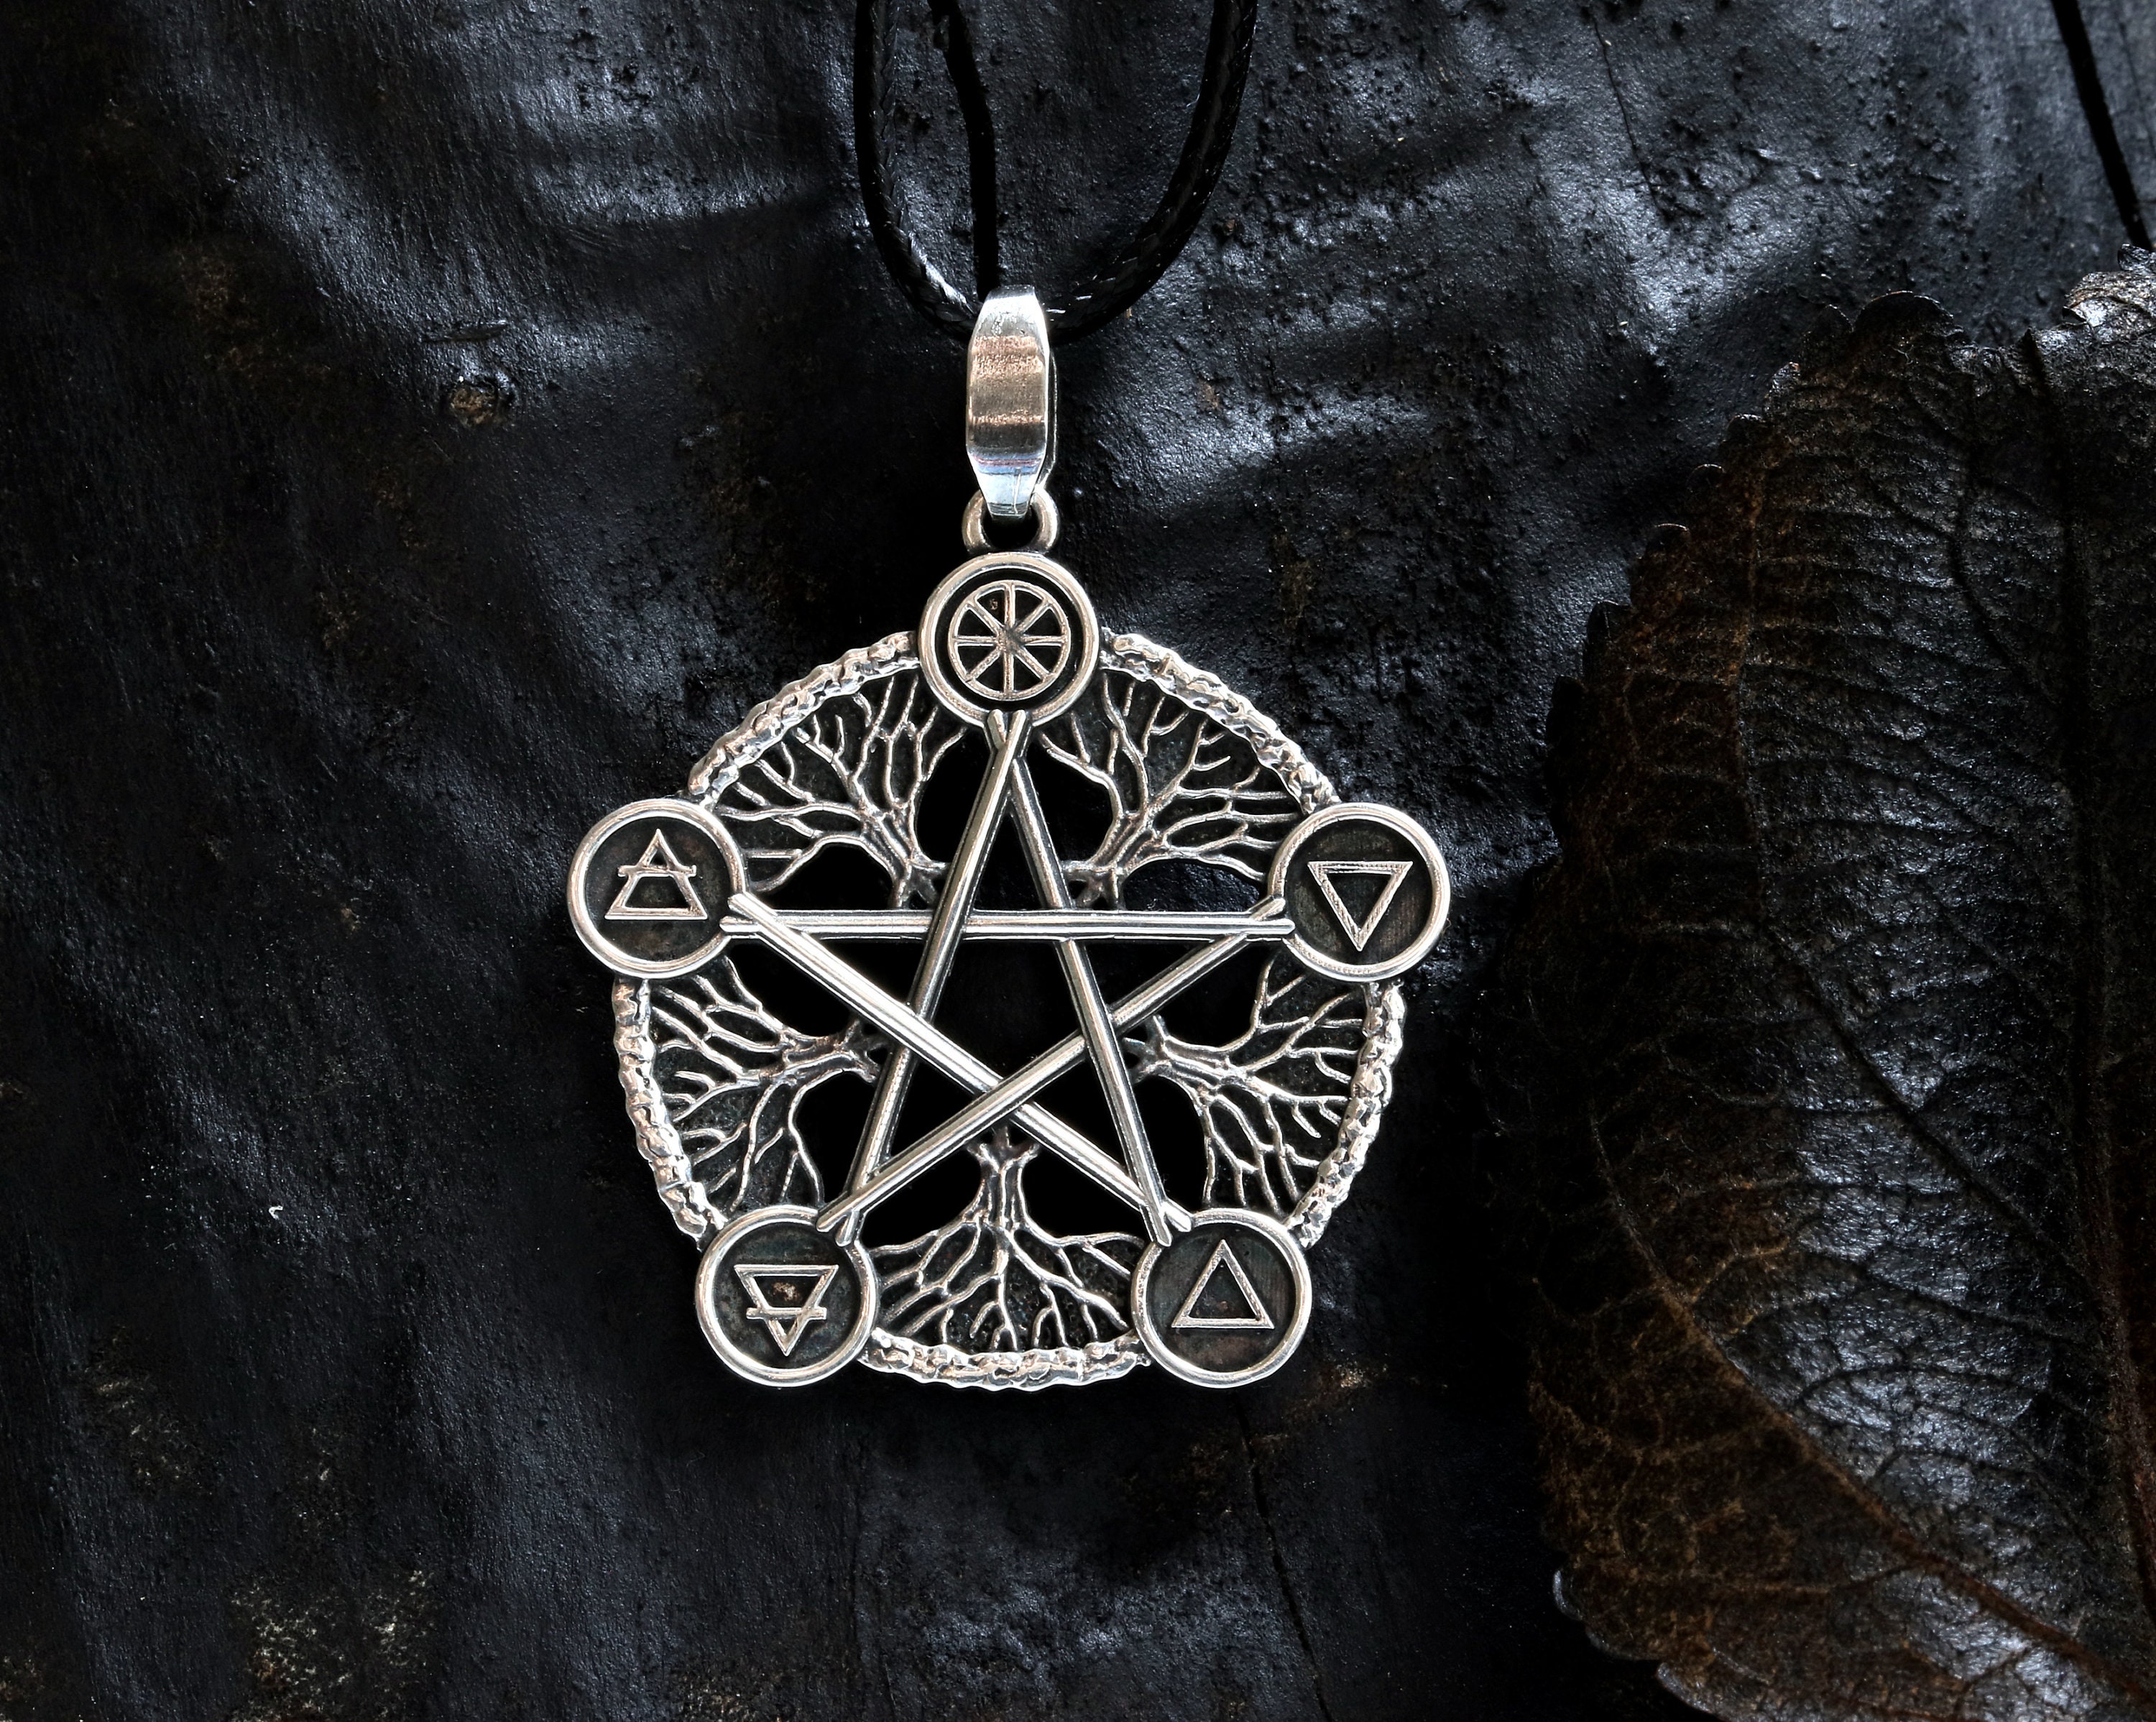 Silver Pentacle - Museum of Witchcraft and Magic